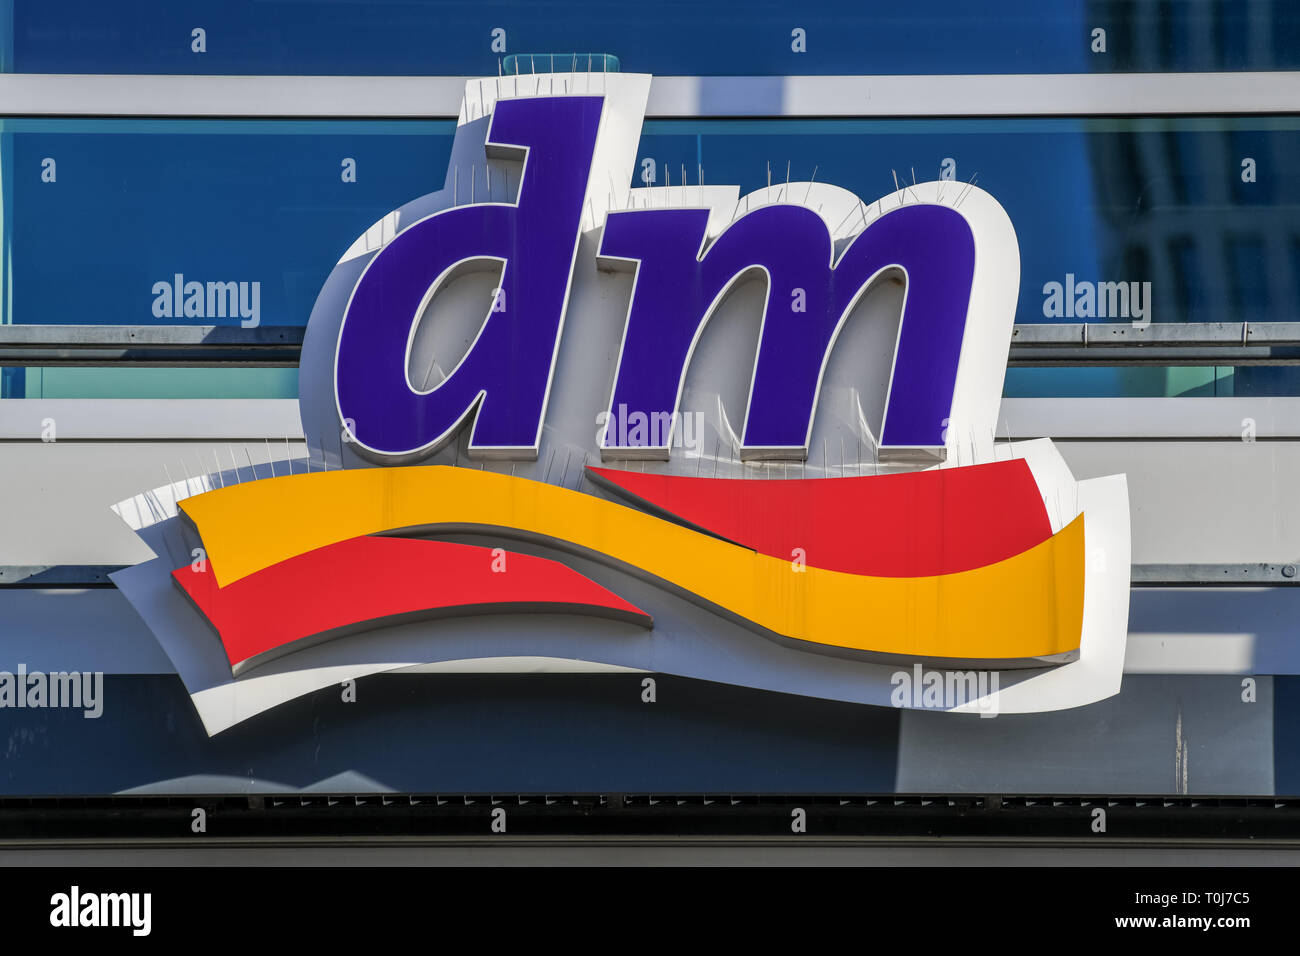 Dm drogerie logo hi-res stock photography and images - Alamy